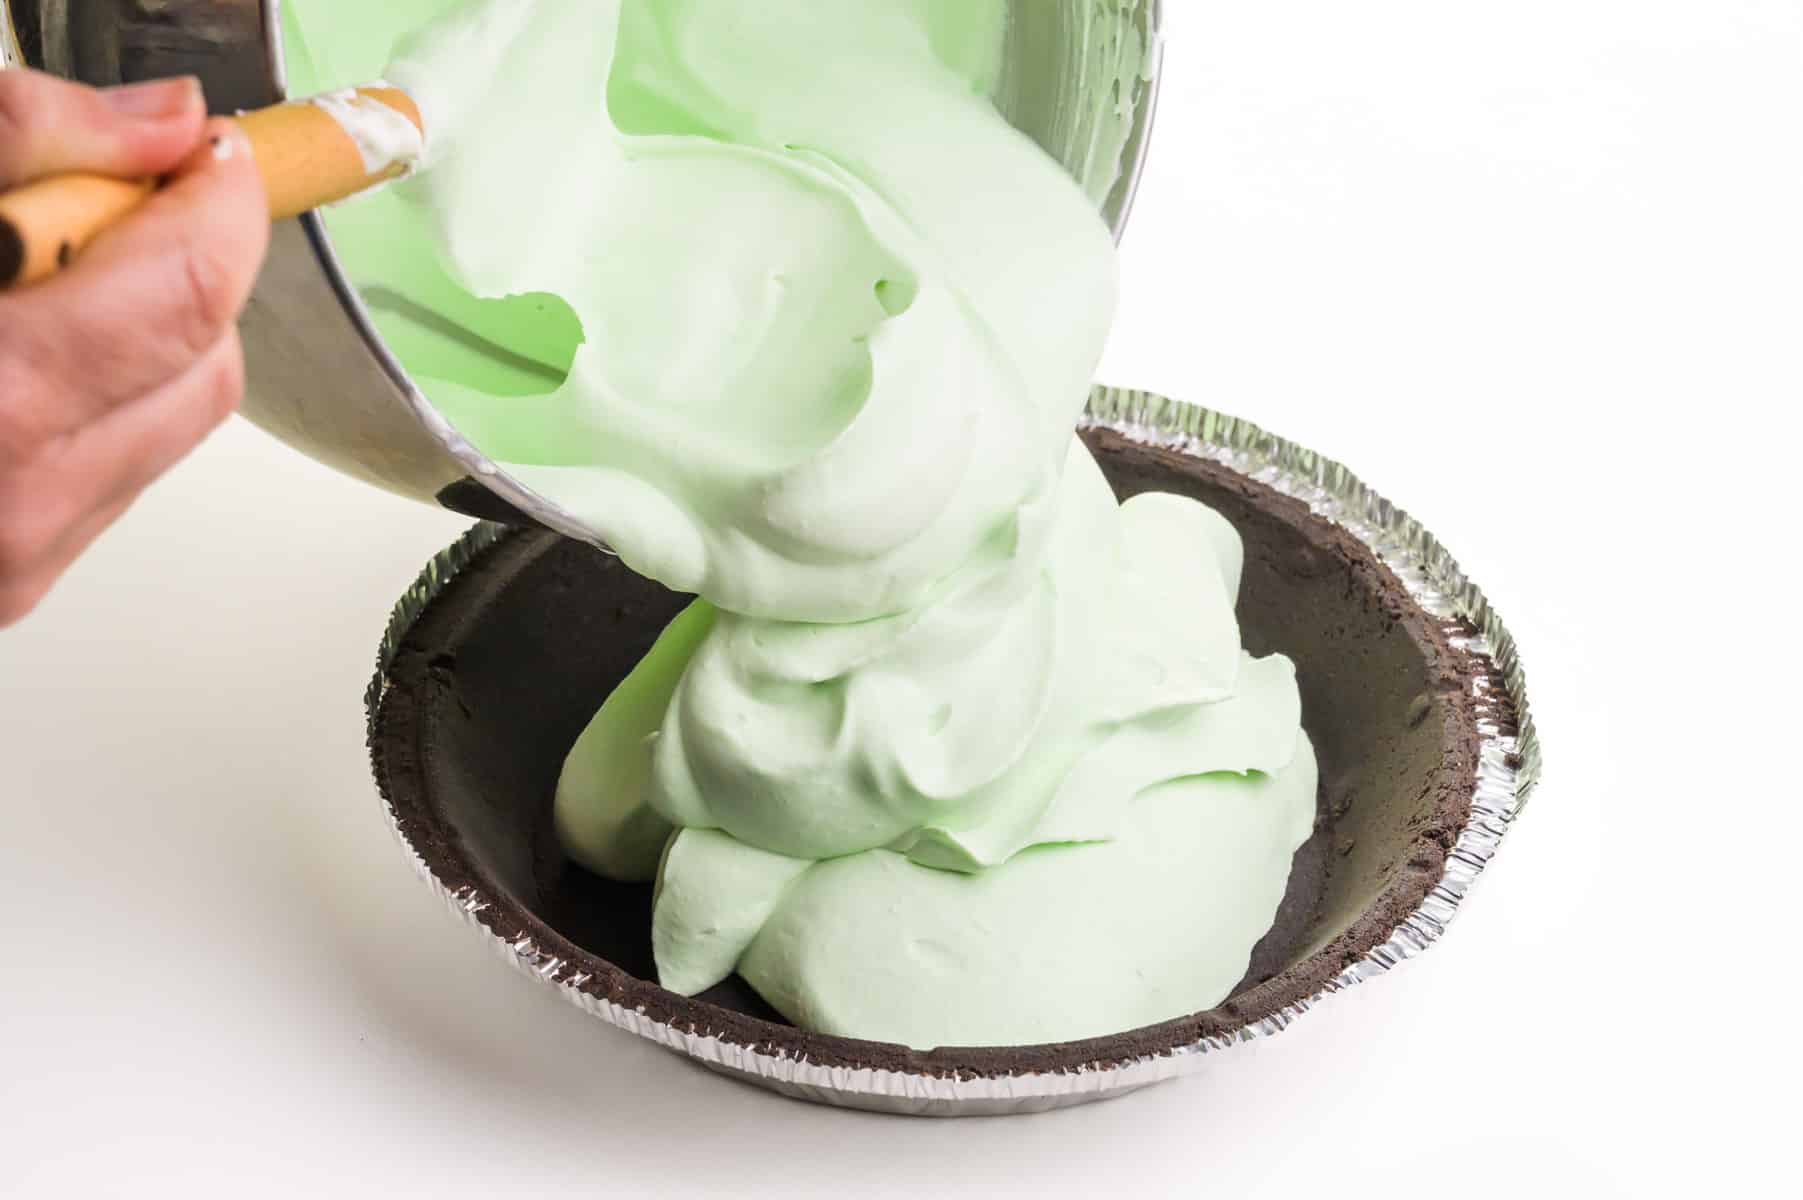 Green whipped mousse being poured into a chocolate pie crust.